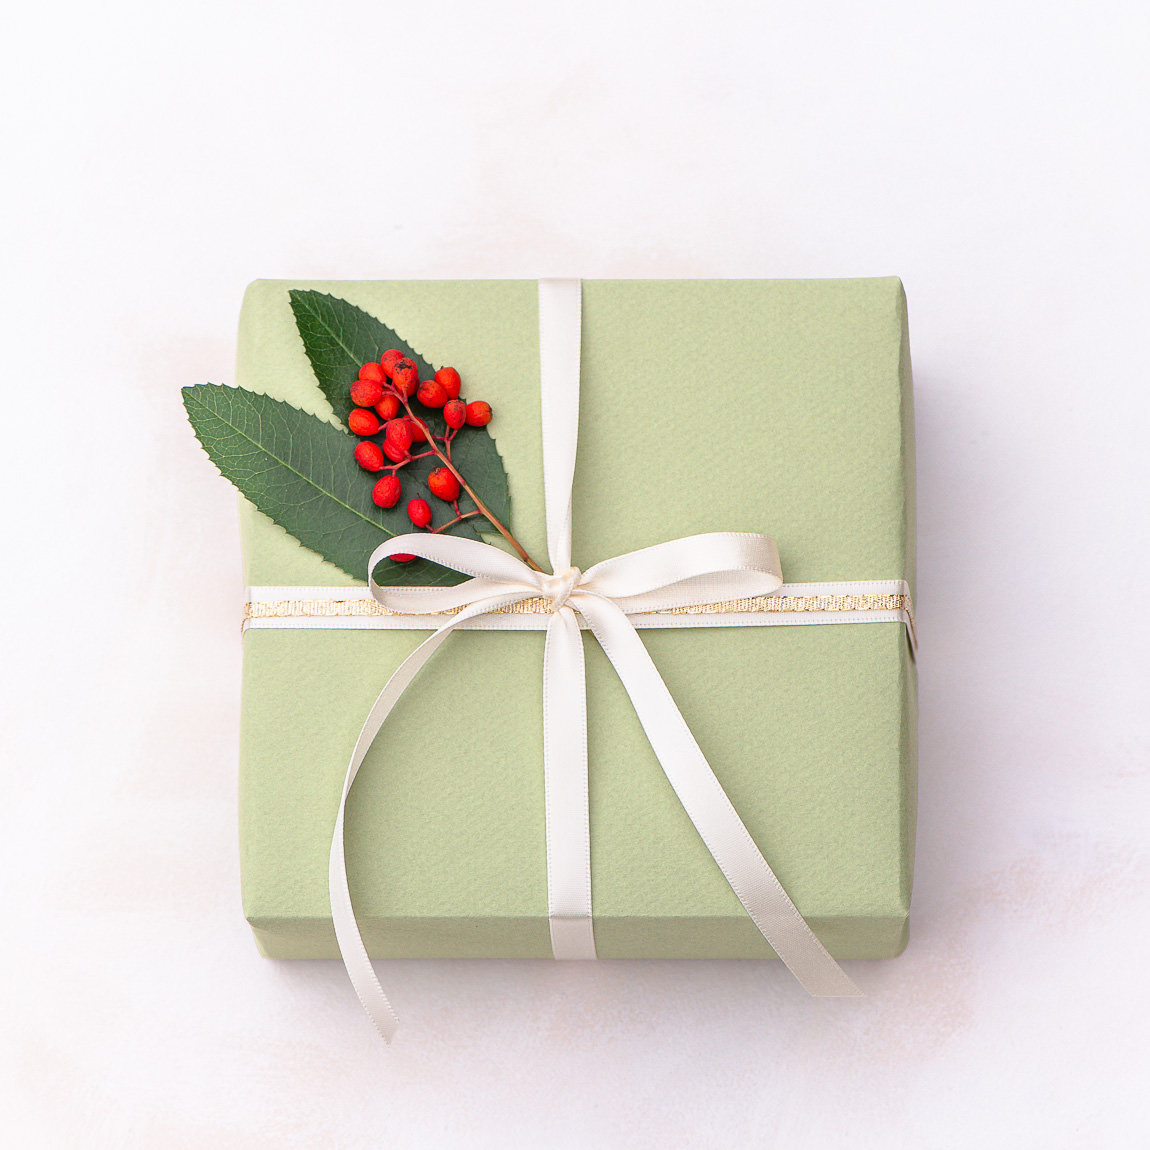 Gift wrapping with recyclable paper, reusable ribbon and flowers